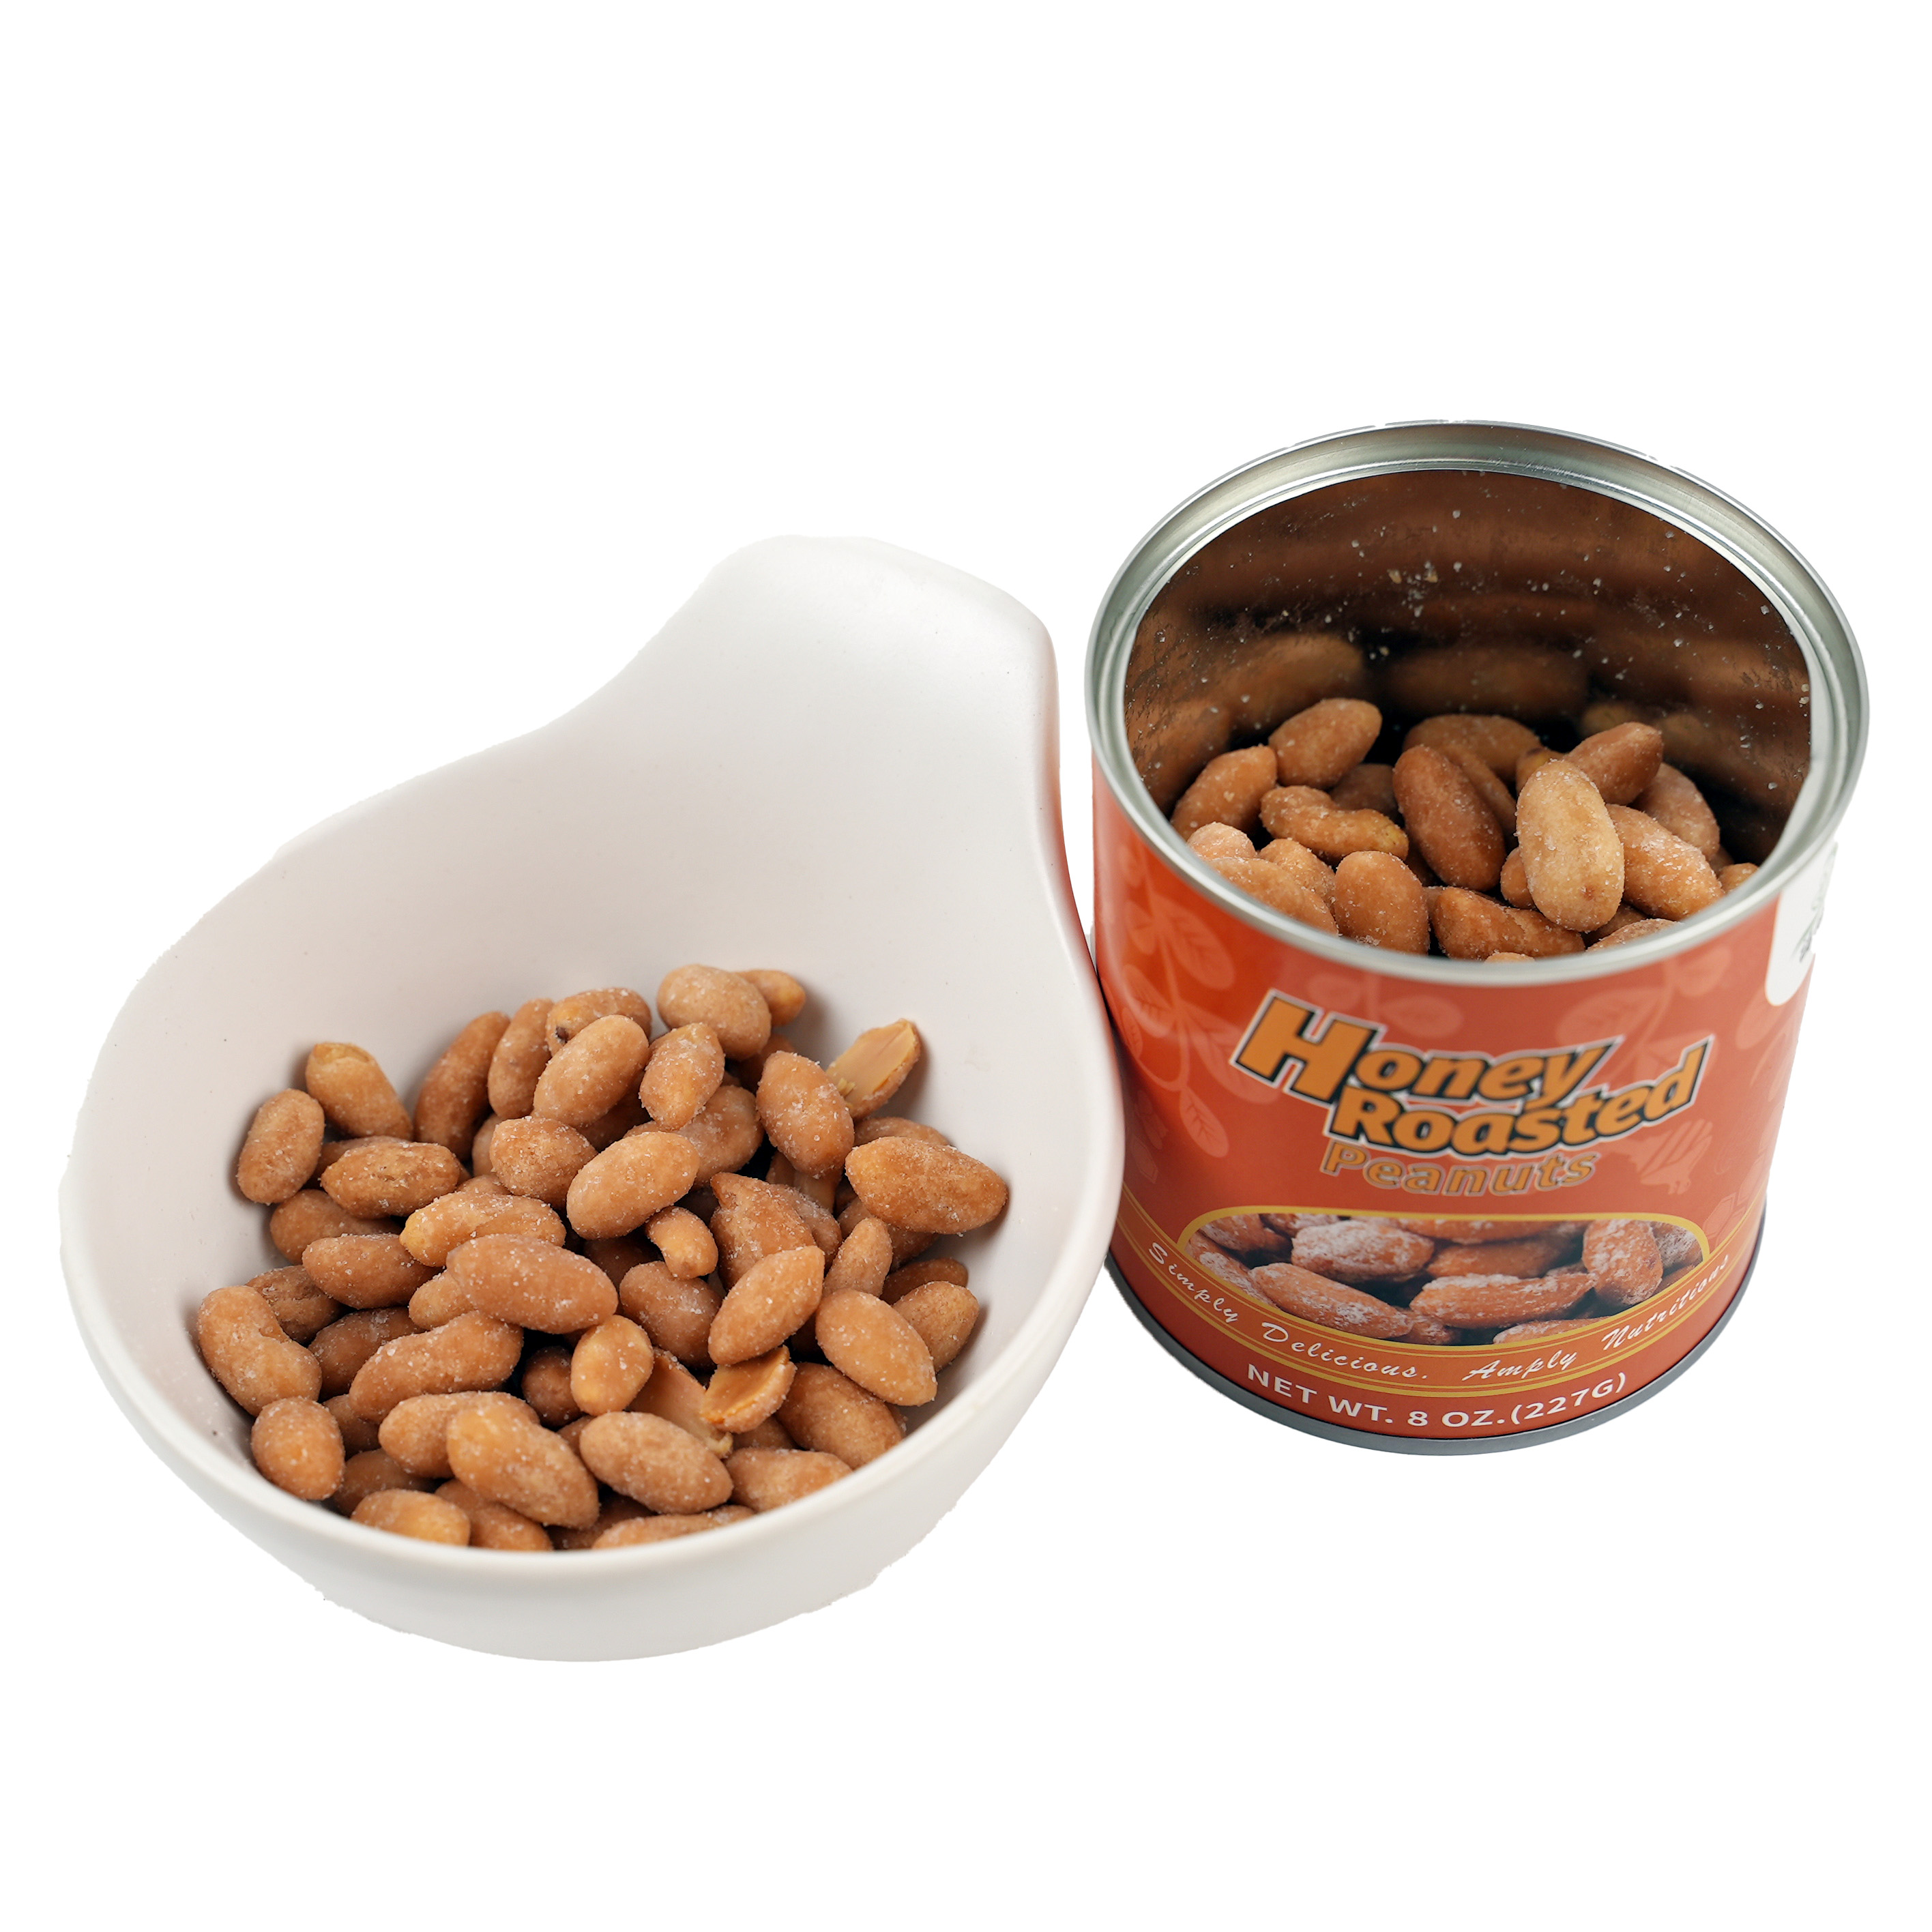 Fuwang Honey Roasted Peanuts 227g-eBest-Nuts & Dried Fruit,Snacks & Confectionery